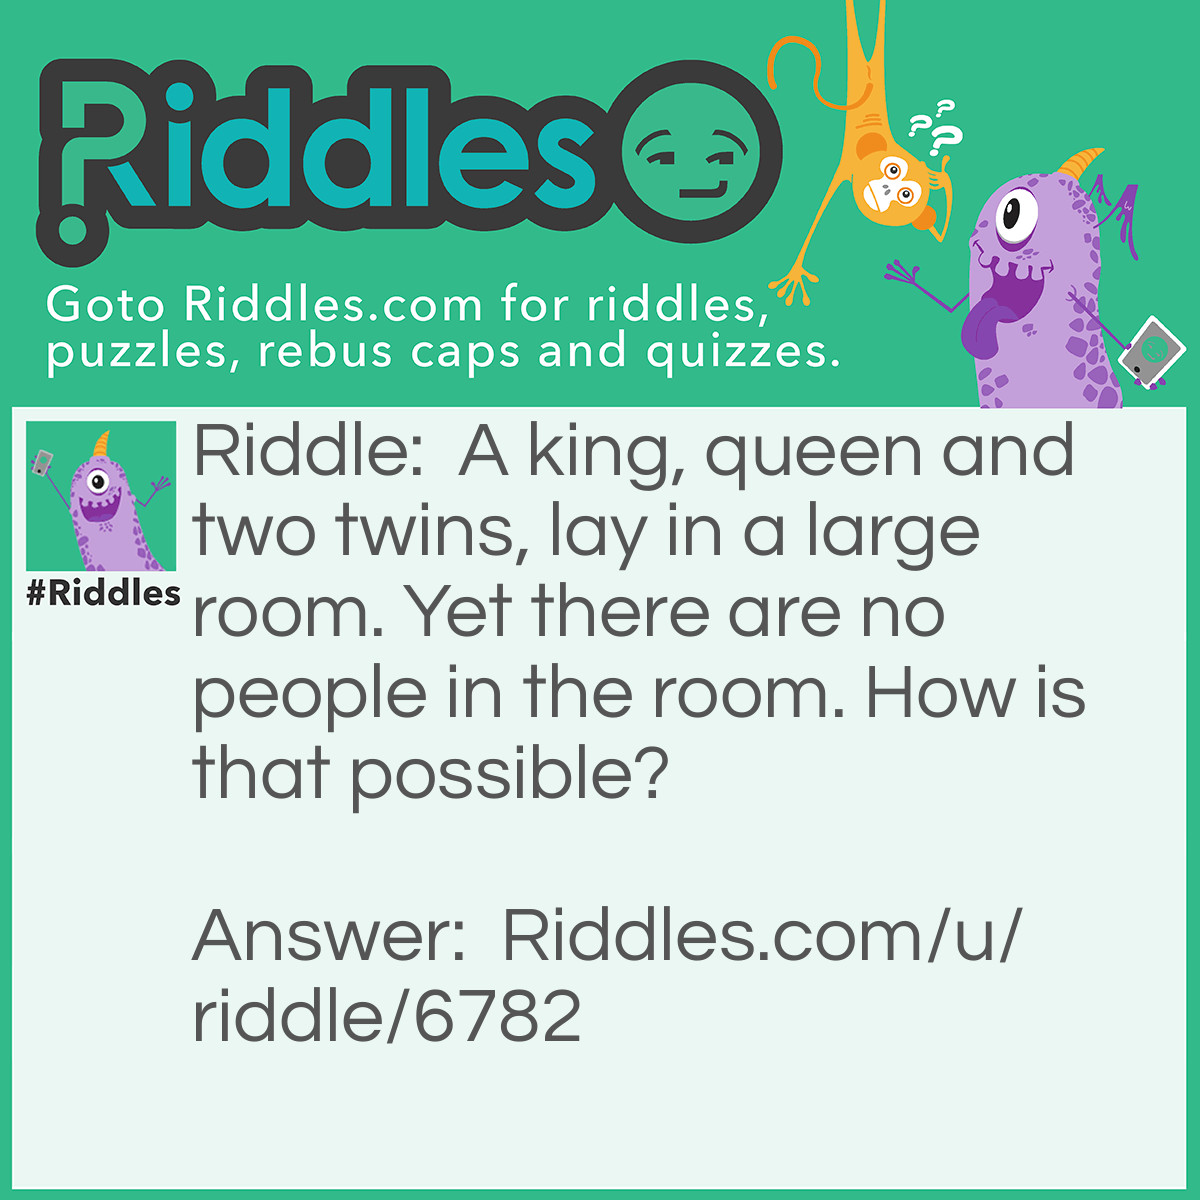 Riddle: A king, queen and two twins, lay in a large room. Yet there are no people in the room. How is that possible? Answer: They are beds.